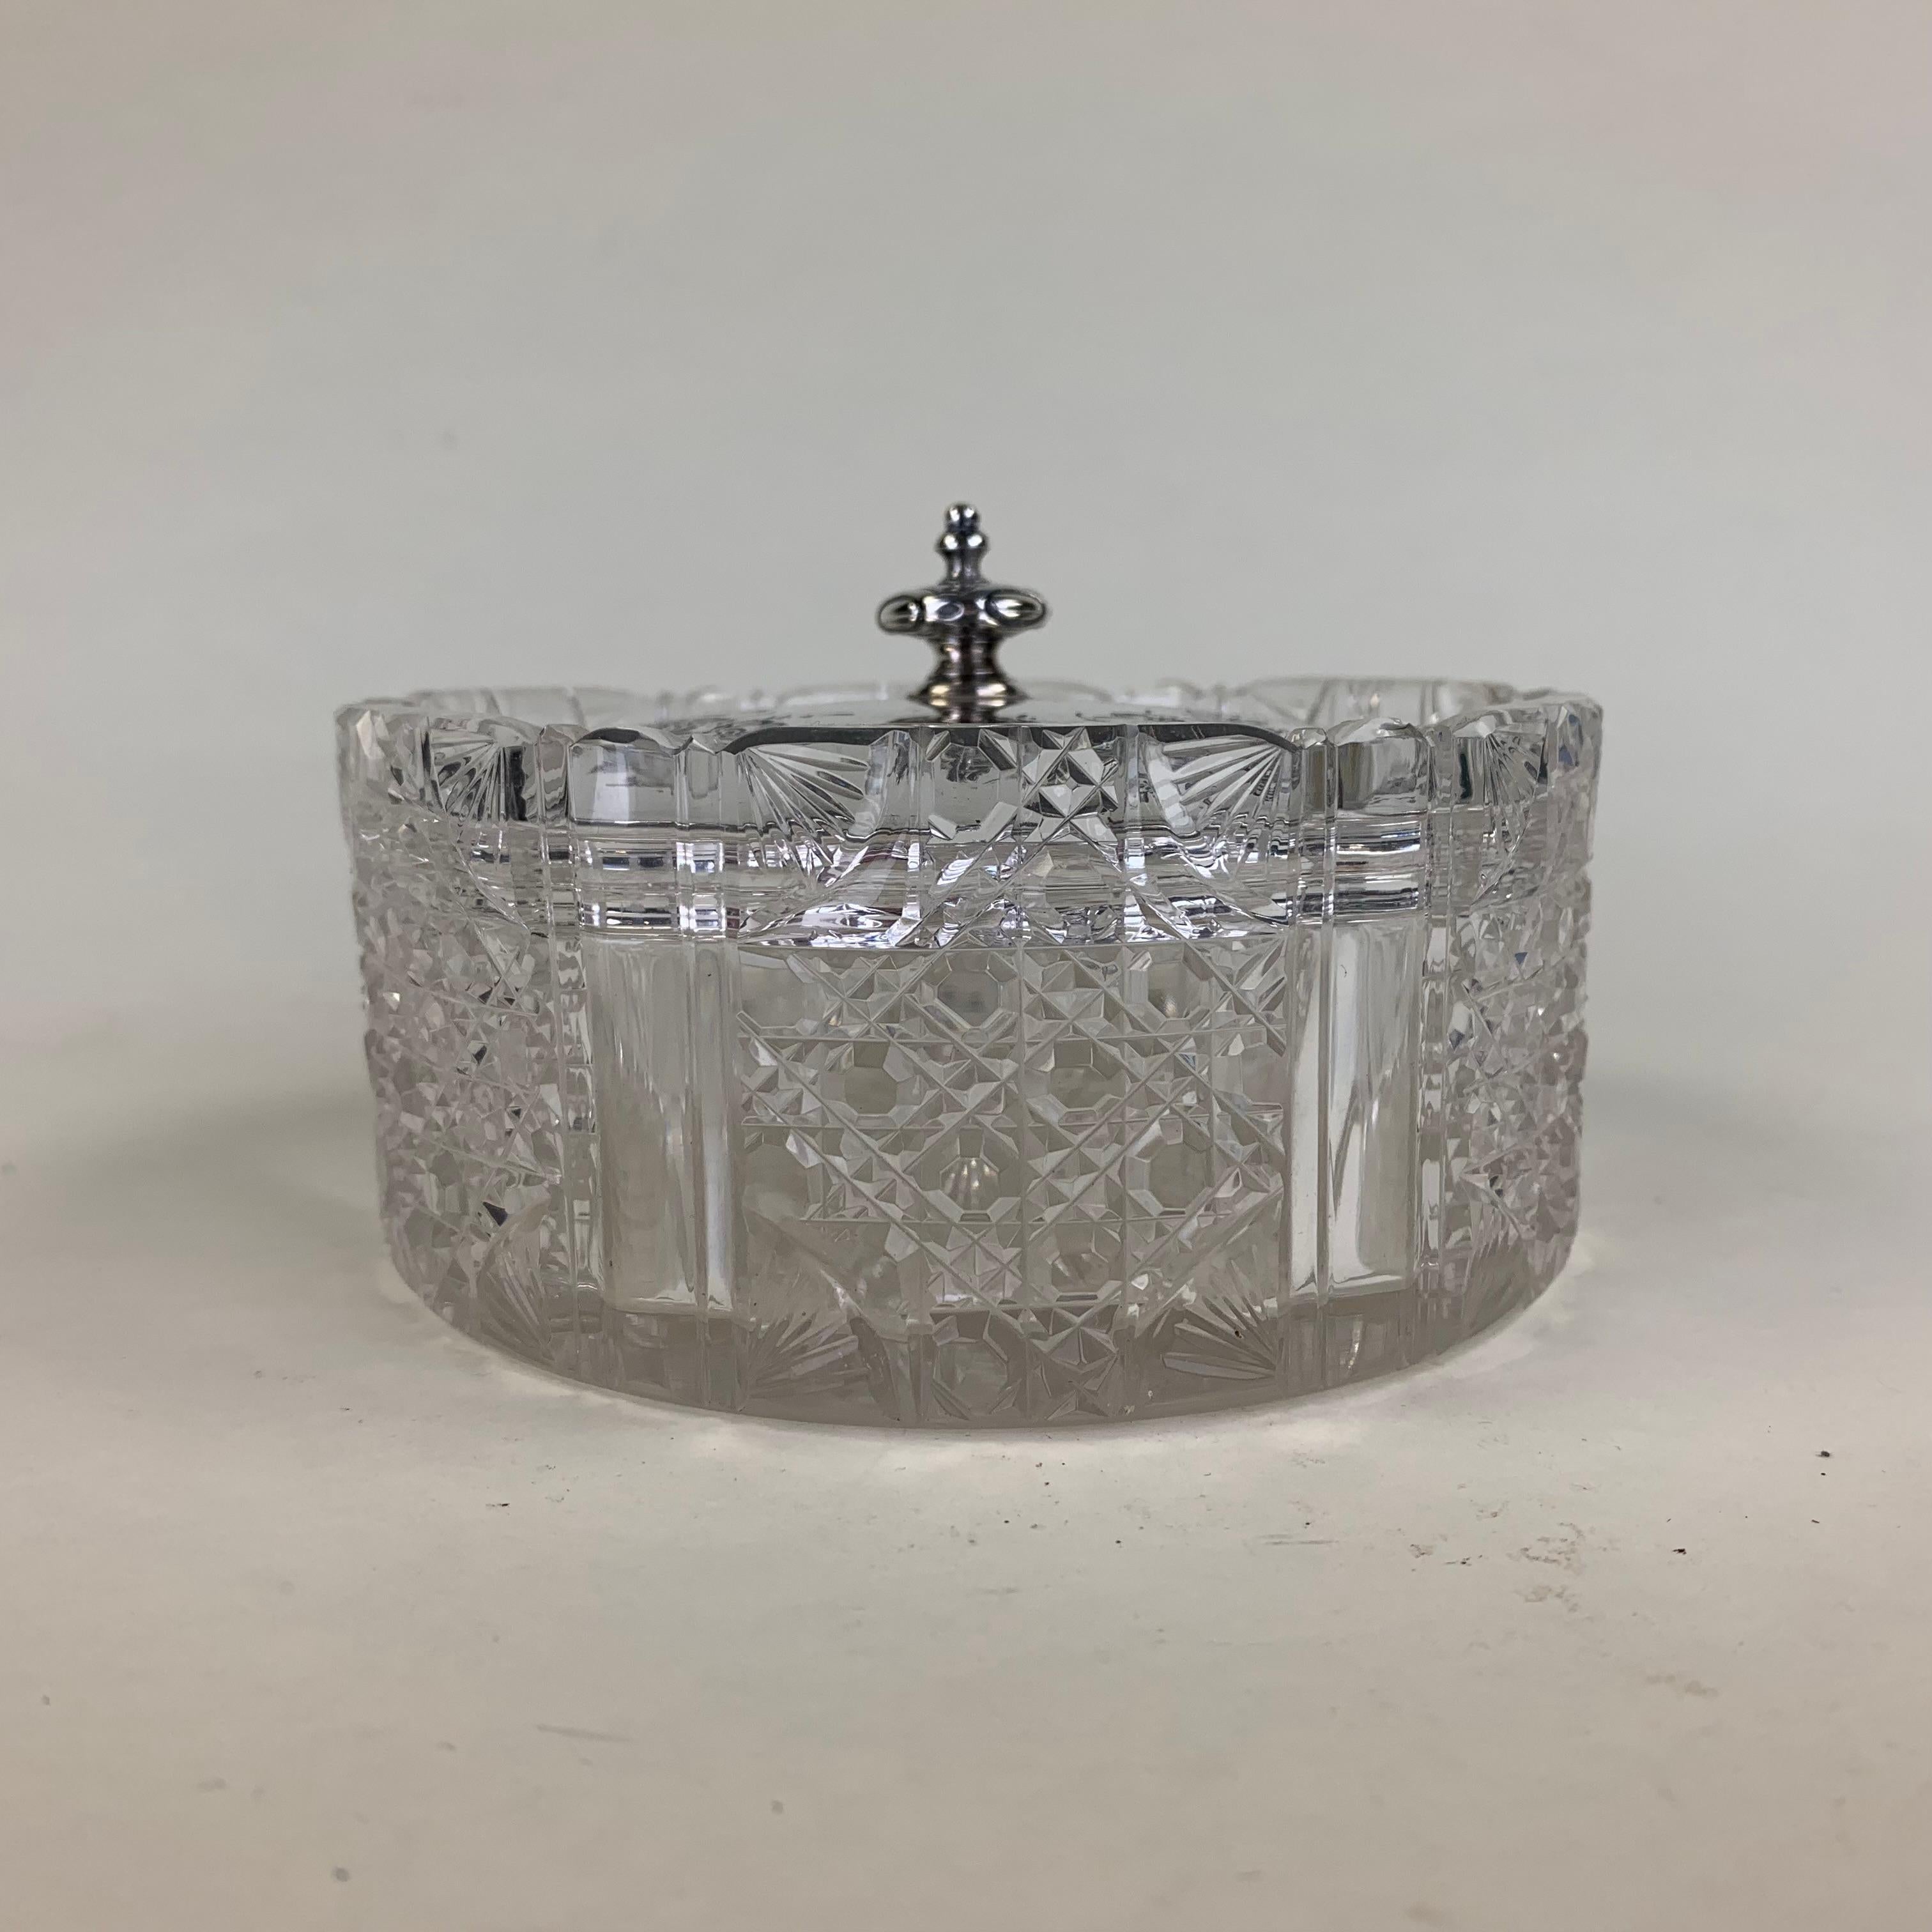 Edwardian cut glass jam pot with engraved silver lid. Sheffield, 1902 by Atkin Brothers.
 
Measure: Height including finial is 7cms.